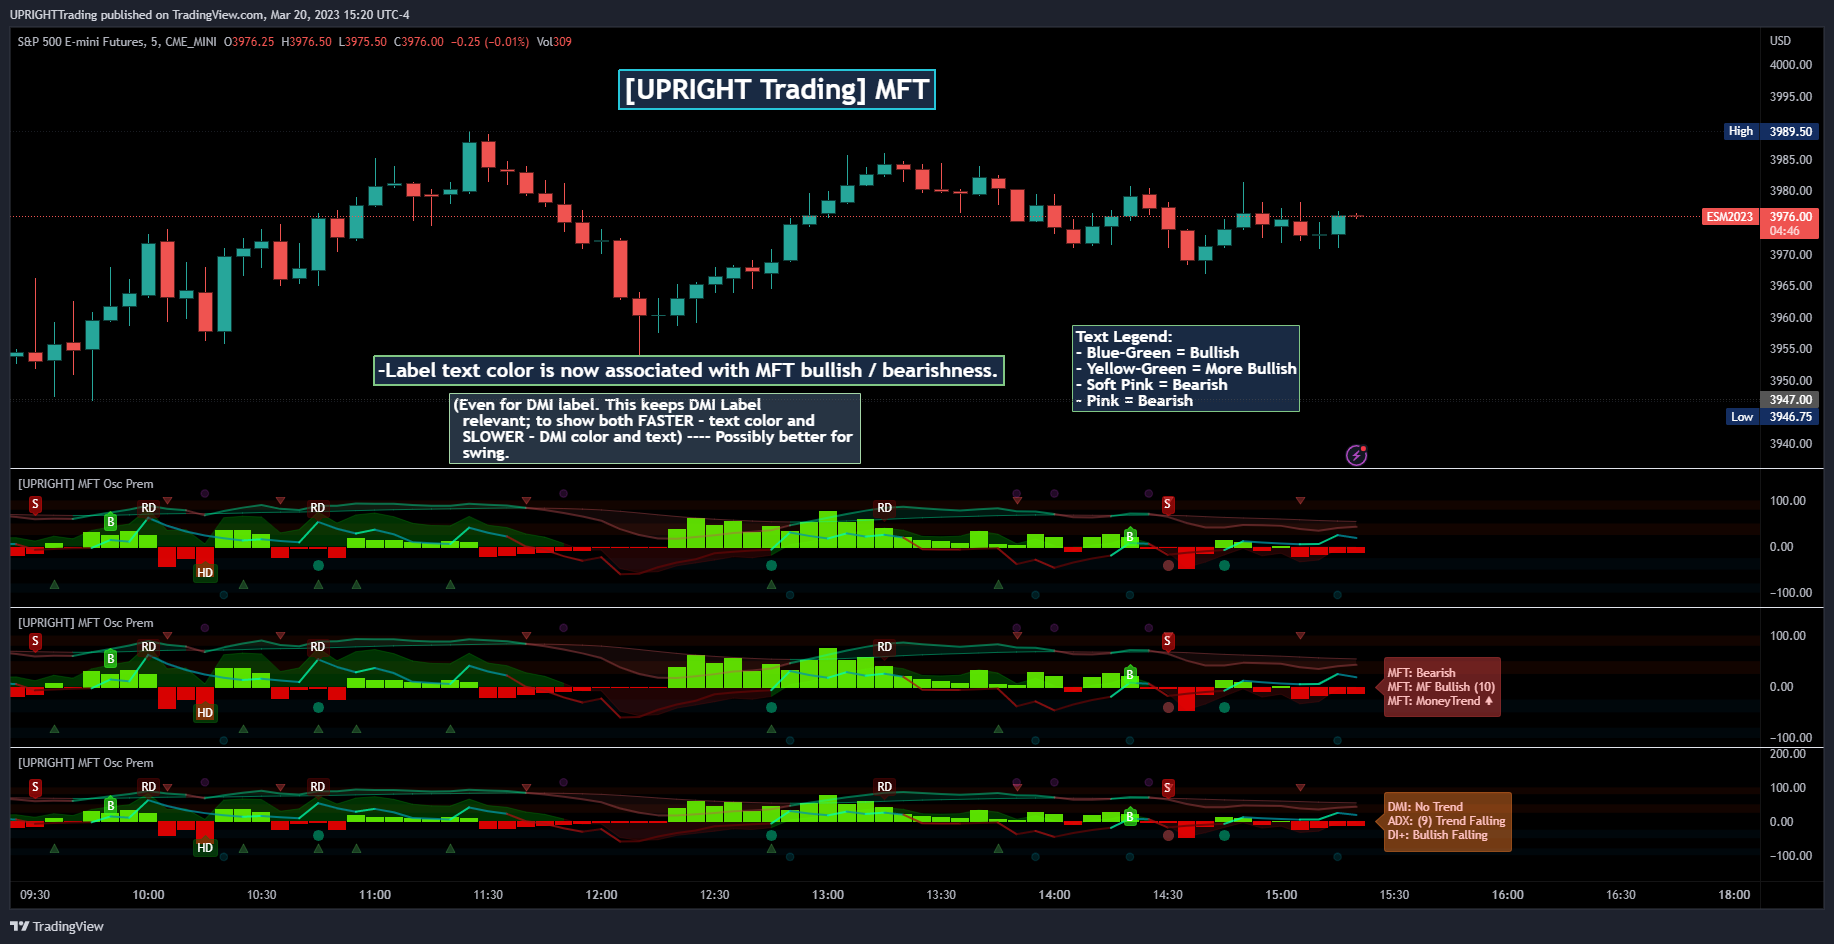 MoneyFlowTrend tell the trader the direction money is flowing, the general trend, the bank/whales moneyflow, reversal and divergence signals and accurate buy/sell signals, and even displays a stat label for quick glances.